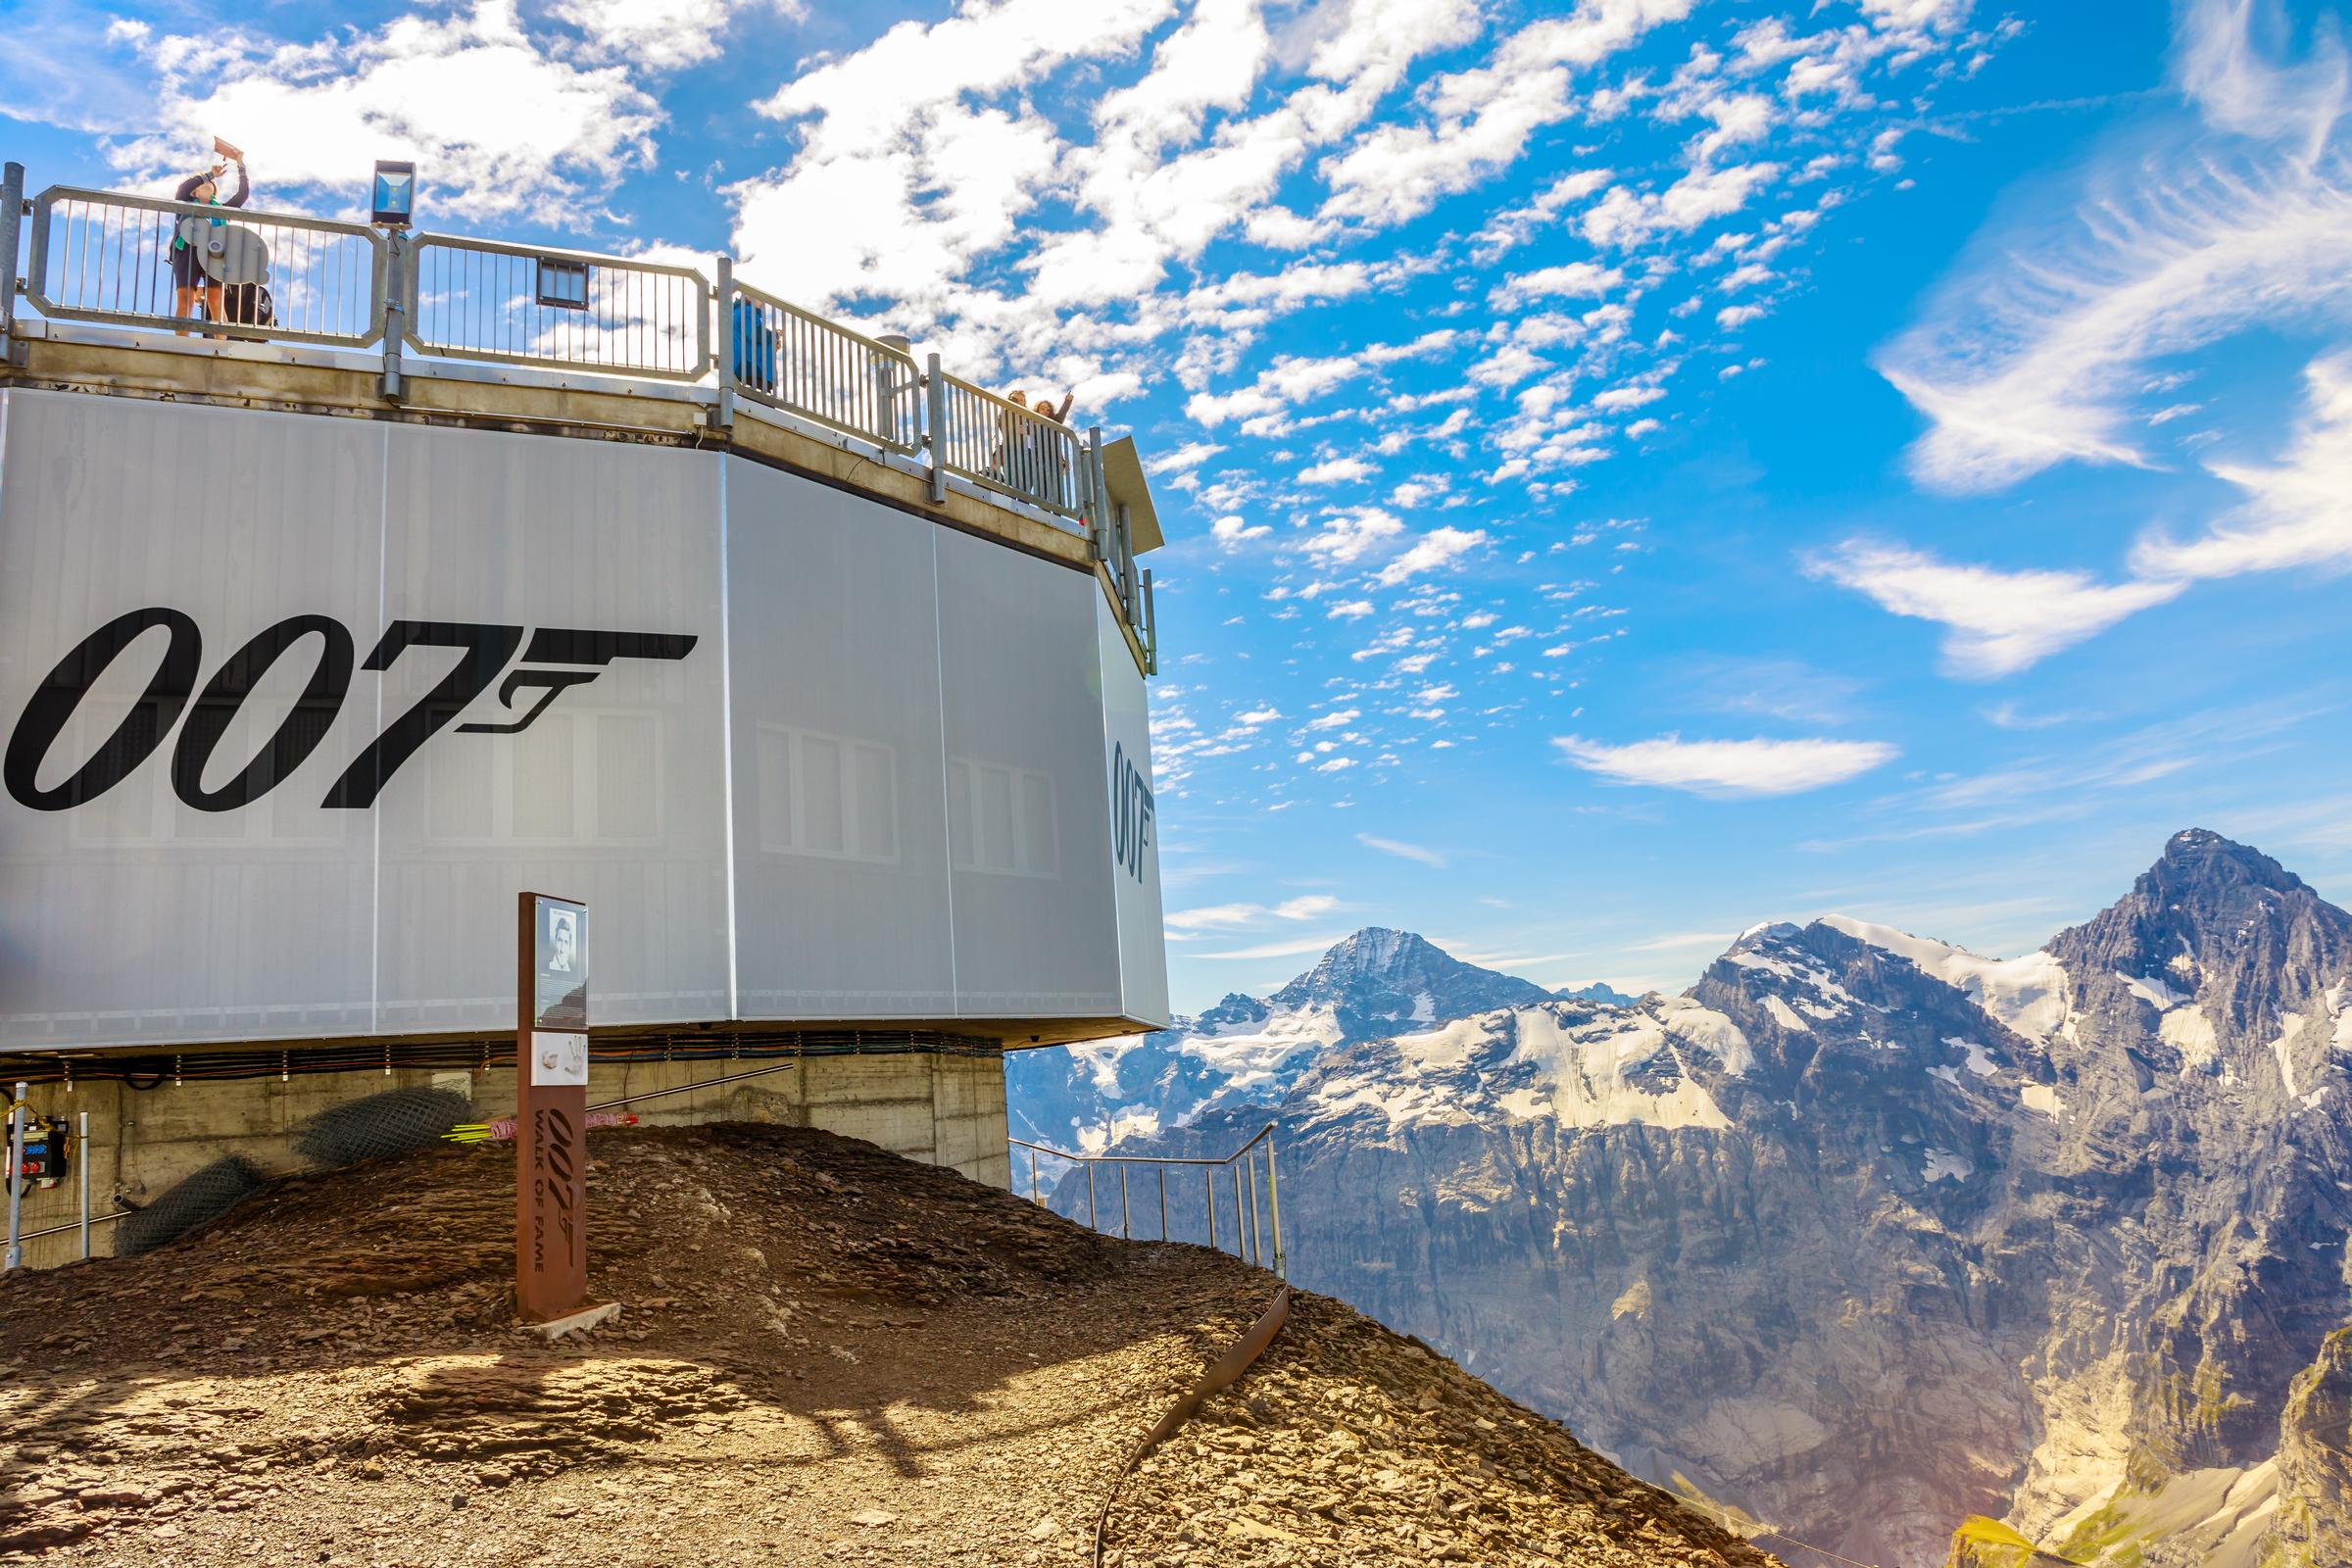 A view platform at Piz Gloria at 2970 meters, the summit of Schilthorn famous for 007 James Bond movie, on August 19, 2020. | Source: Getty Images